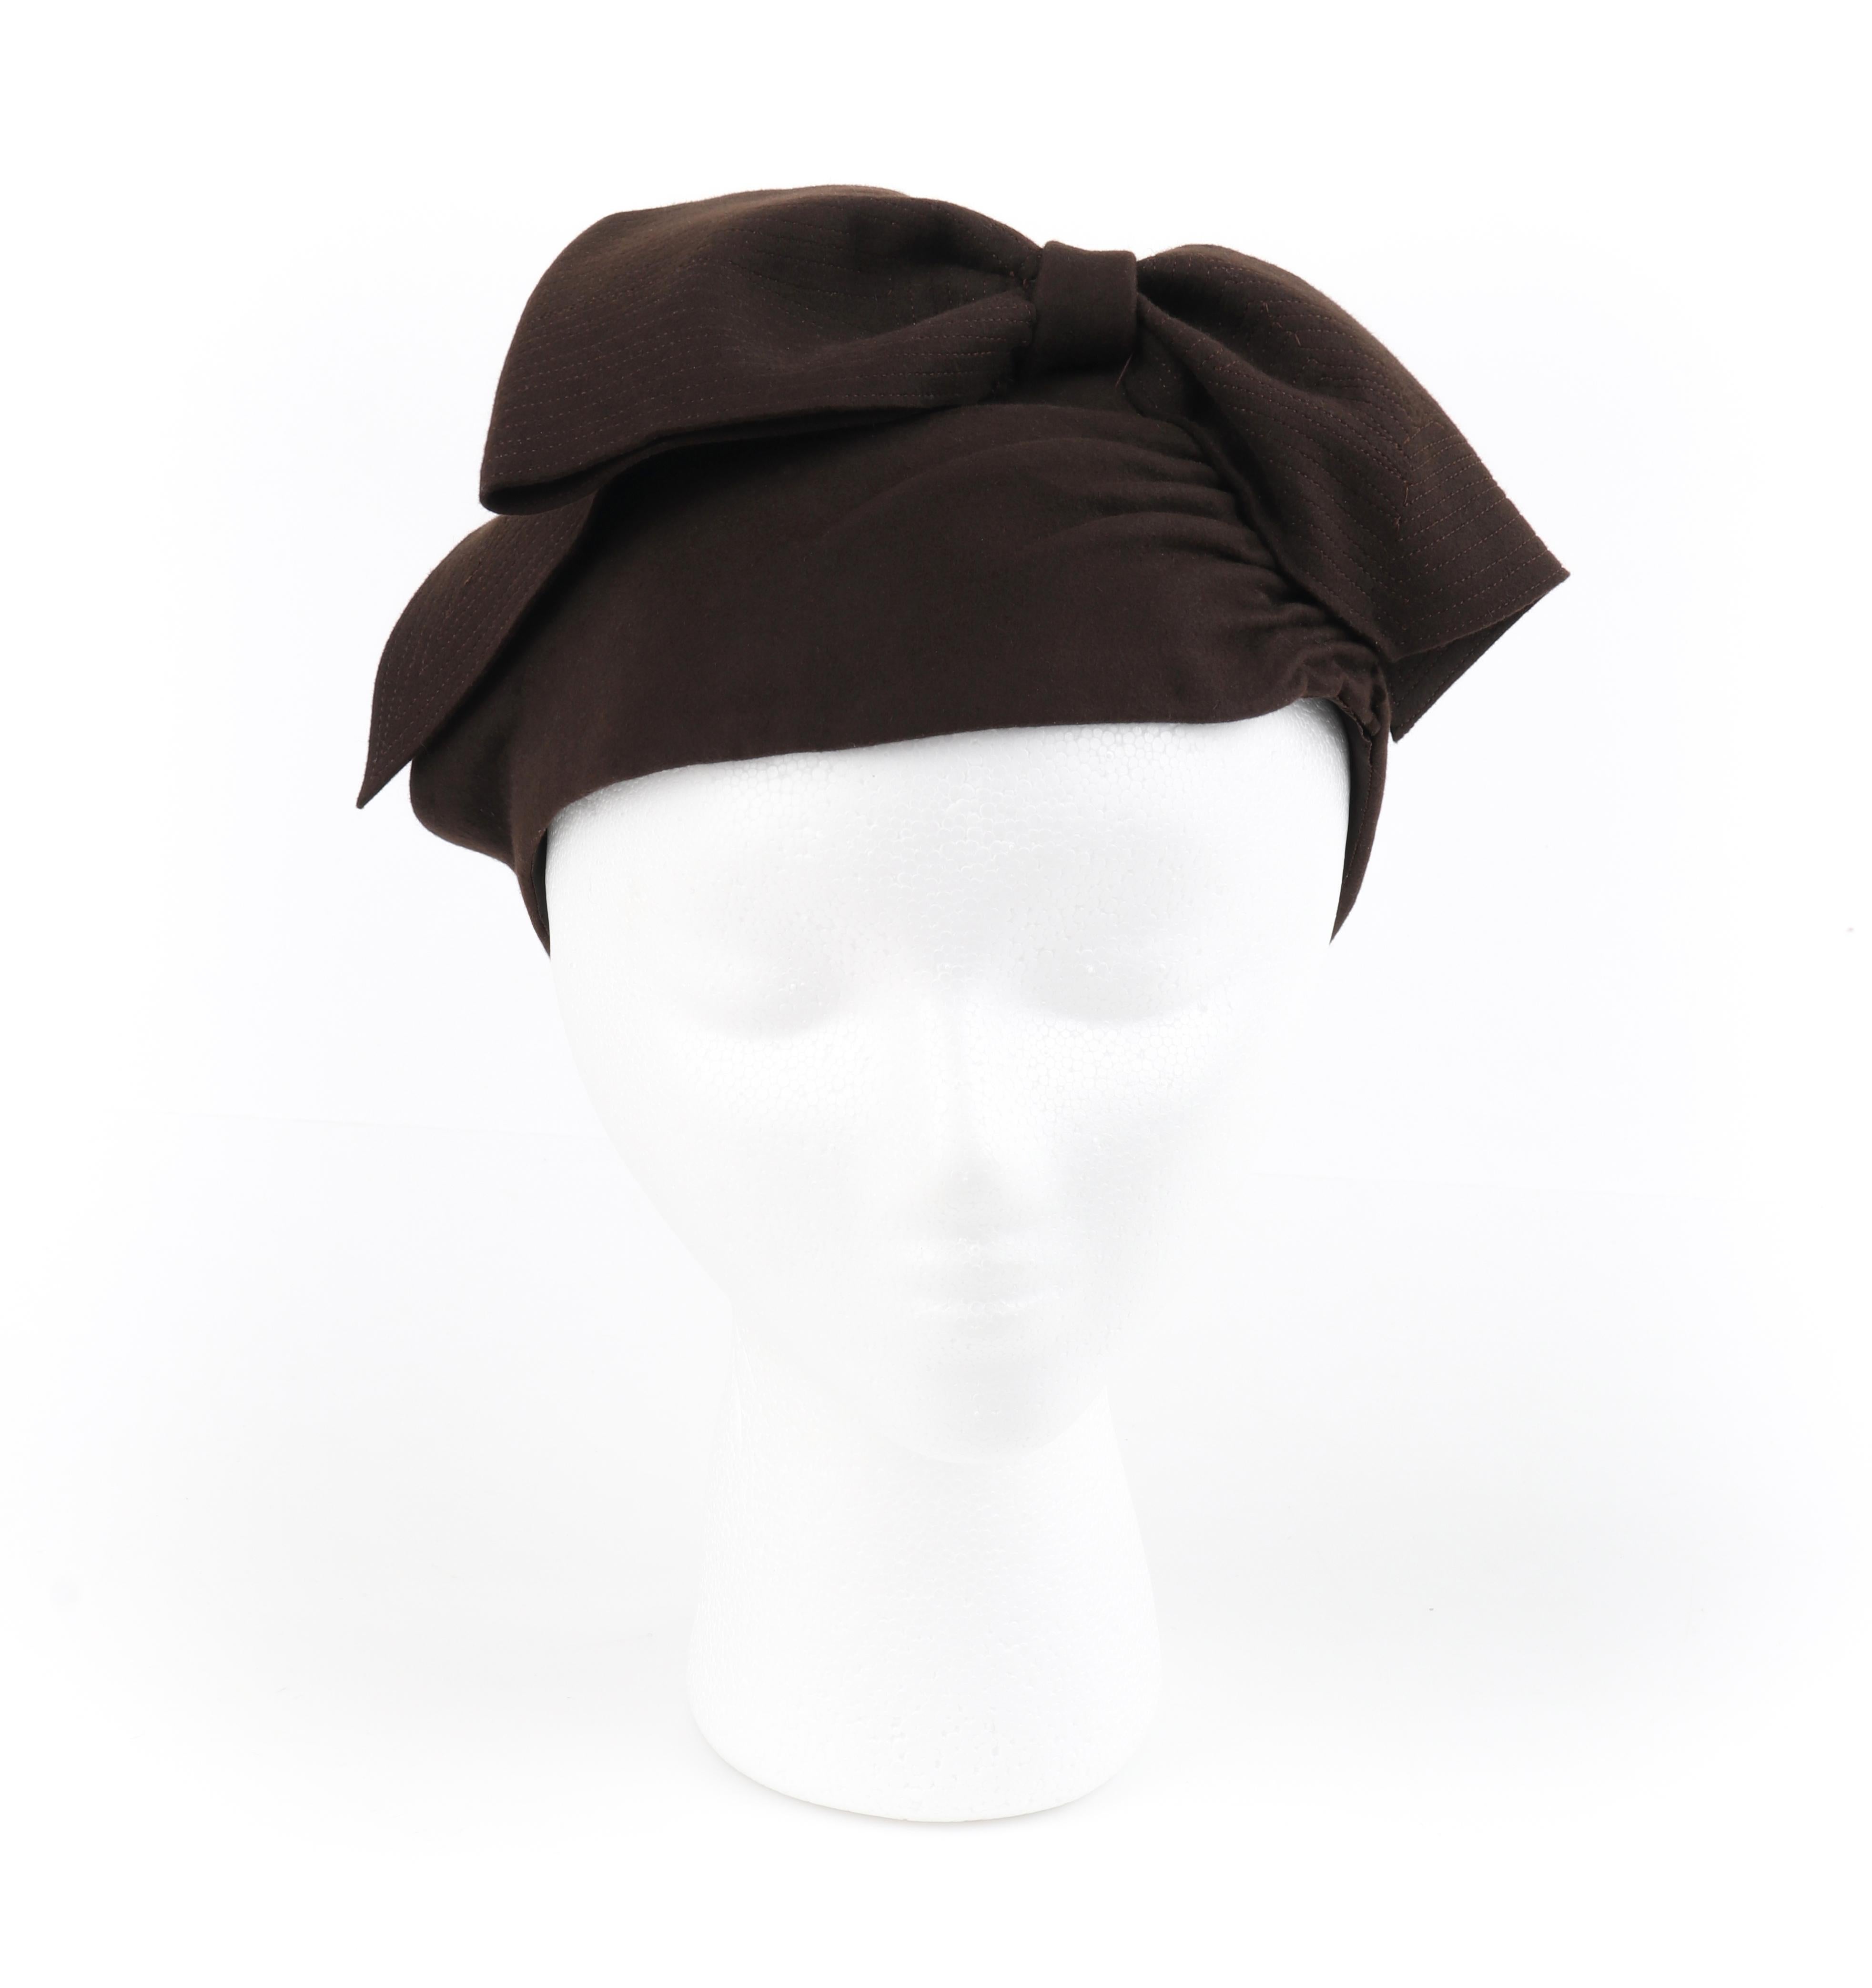 FLORENCE MILLINERY COUTURE c.1940s Chocolate Brown Felt Front Bow Turban Hat
 
Circa: 1940’s
Label(s): “Florence” Millinery, Glencoe Illinois
Style: Turban hat
Color(s): Chocolate brown (exterior, interior)
Lined: No
Unmarked Fabric Content: Felt